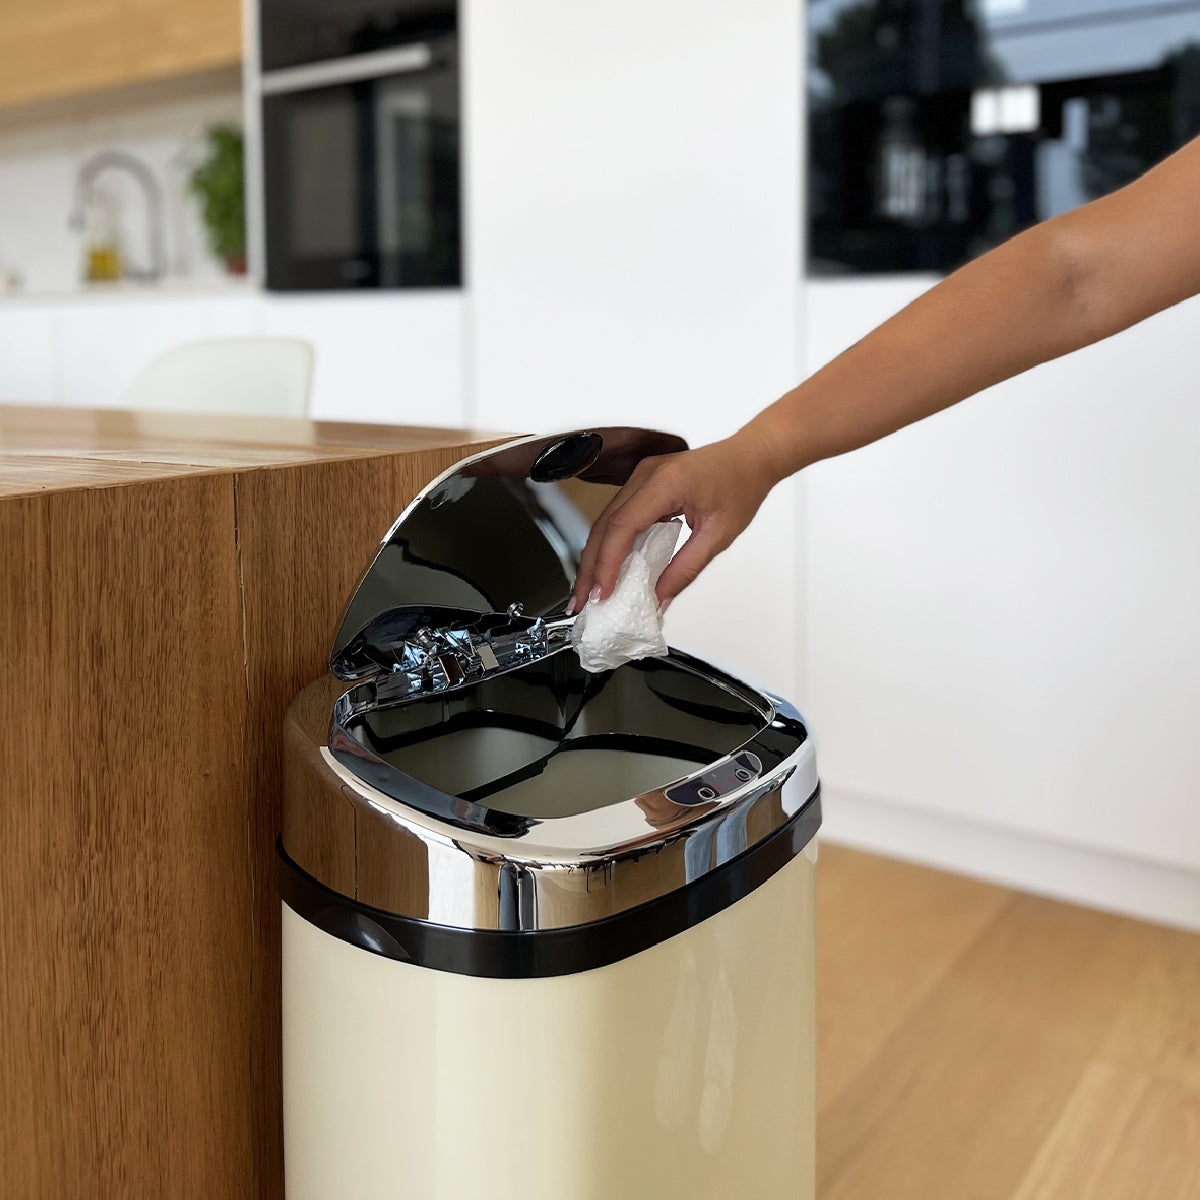 Automatic kitchen bin 42L LARGO Crème gloss in stainless steel with strapping